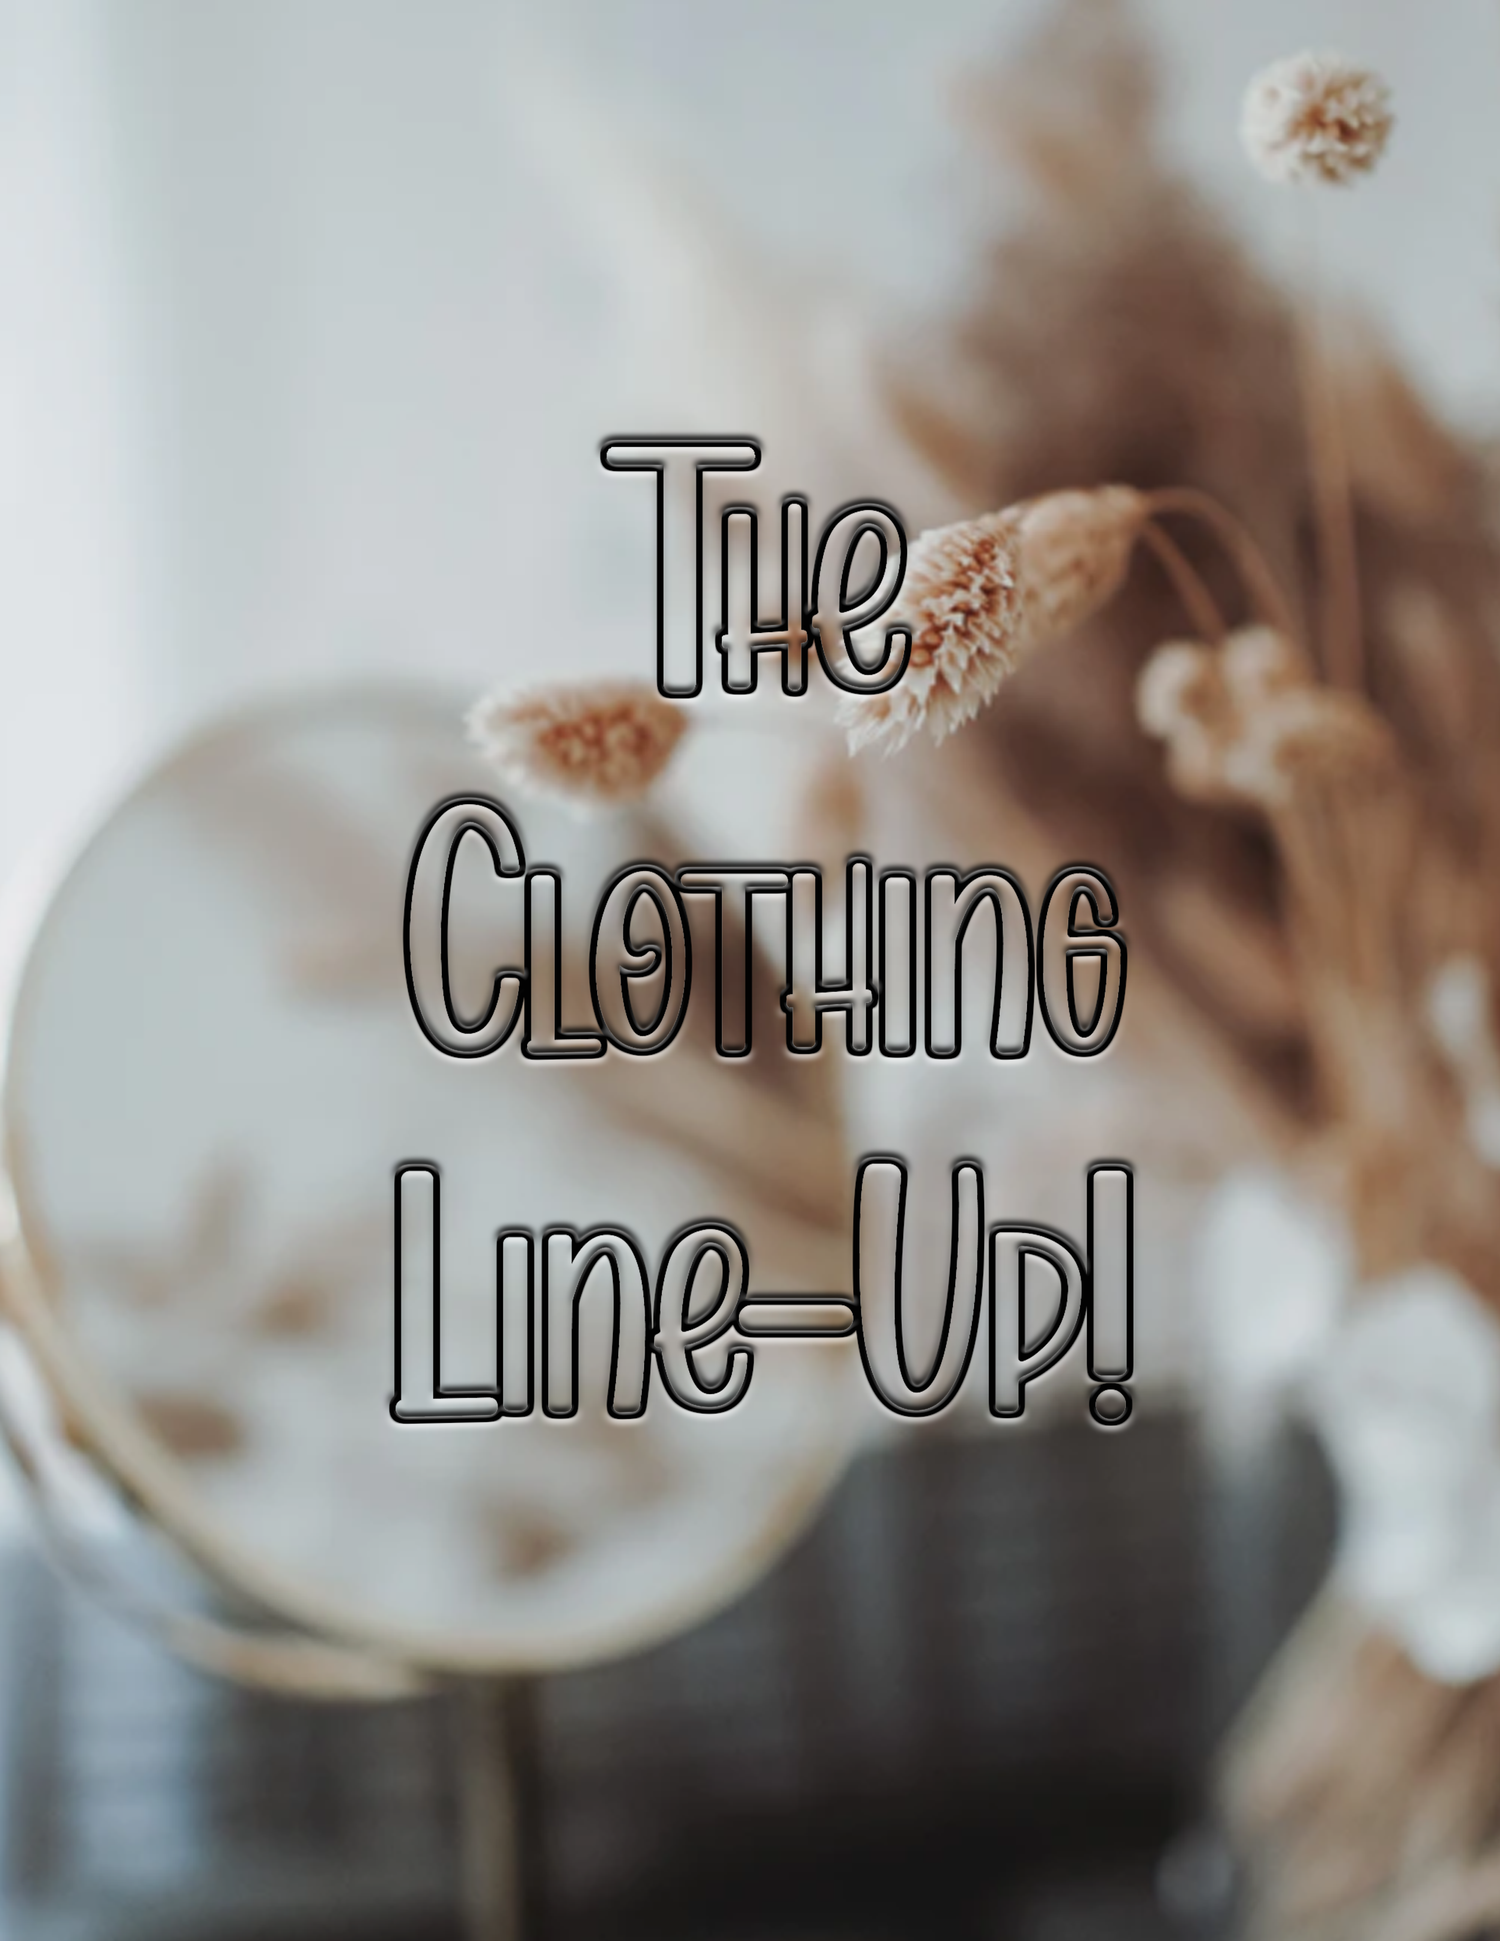 The Clothing Line-Up!